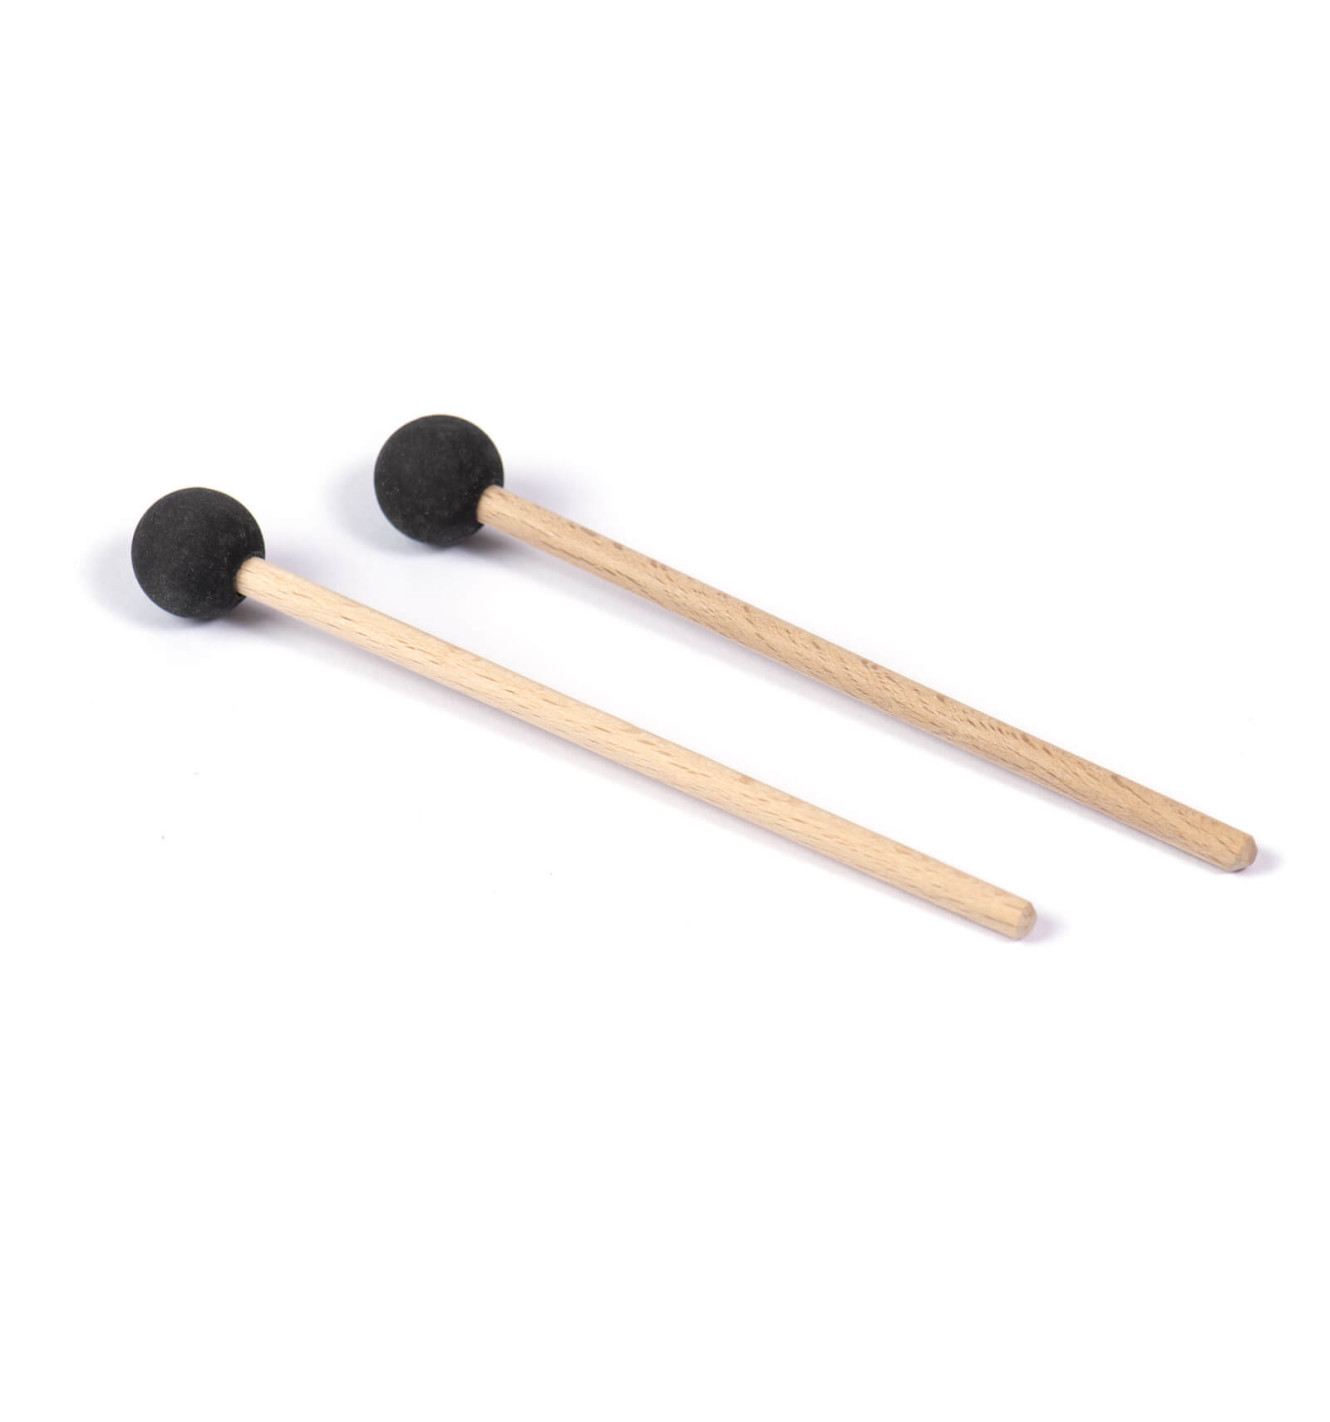 Timber Drum Company Soft Rubber Mallets